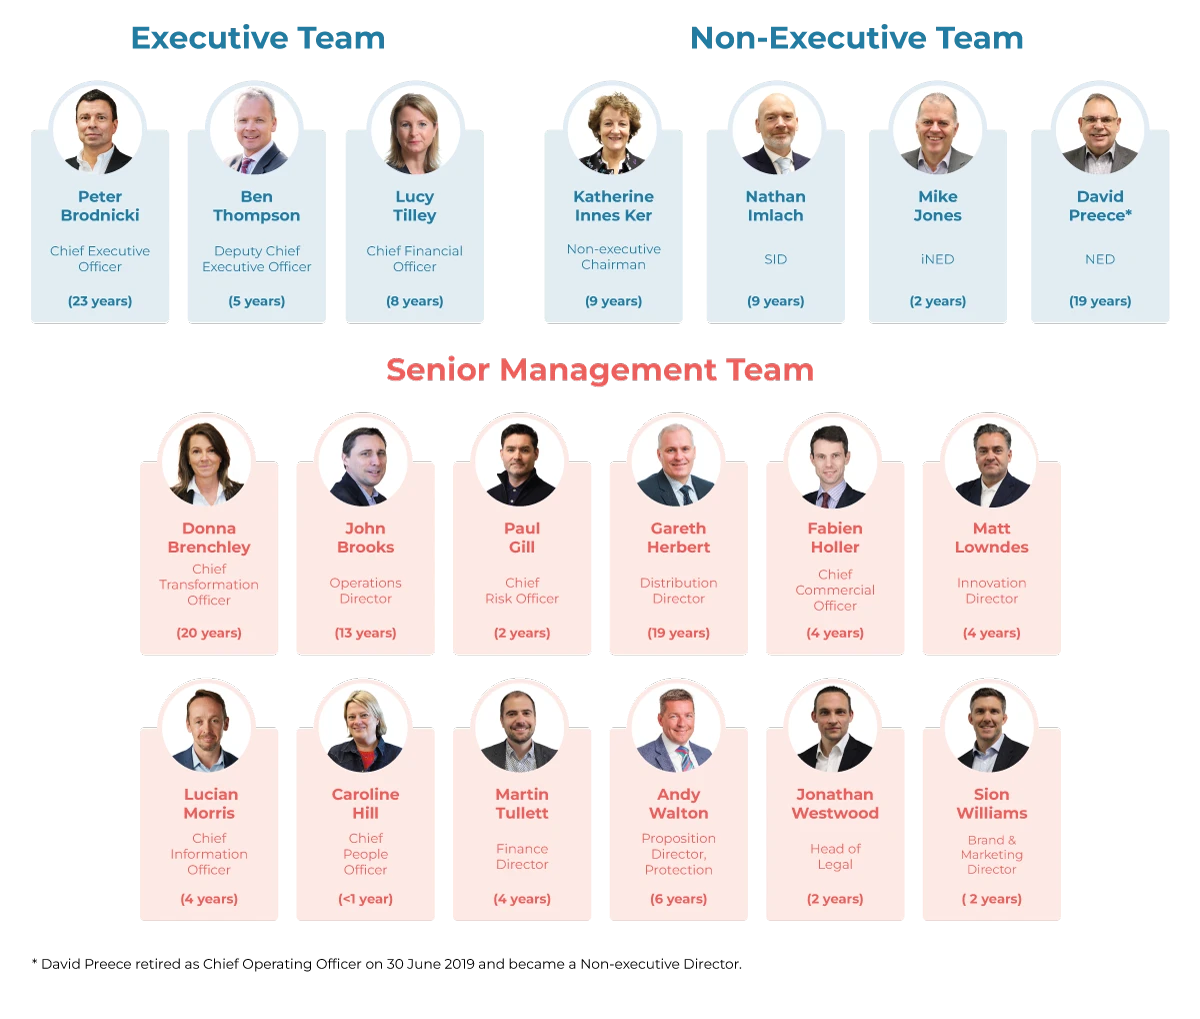 Organisation Chart of Board and Senior Management